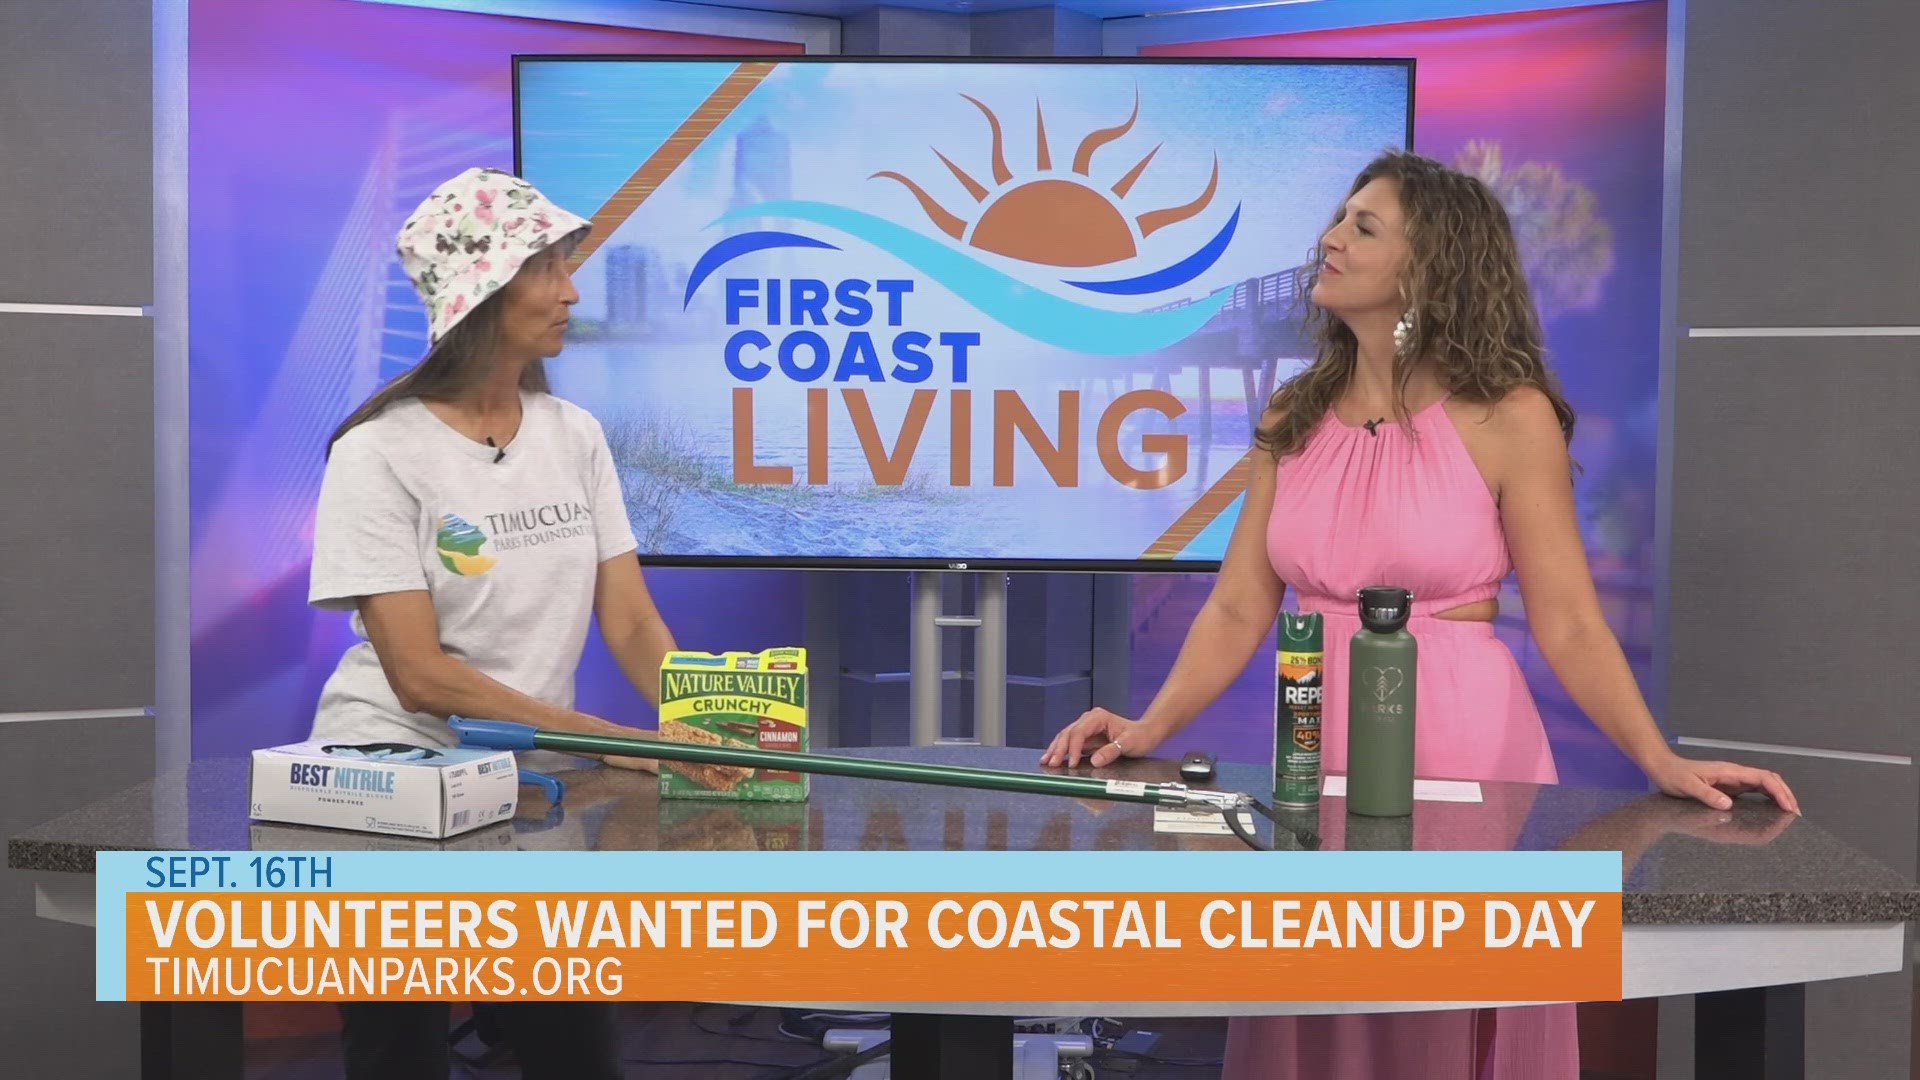 Volunteers wanted for Timucuan Parks Coastal Cleanup day